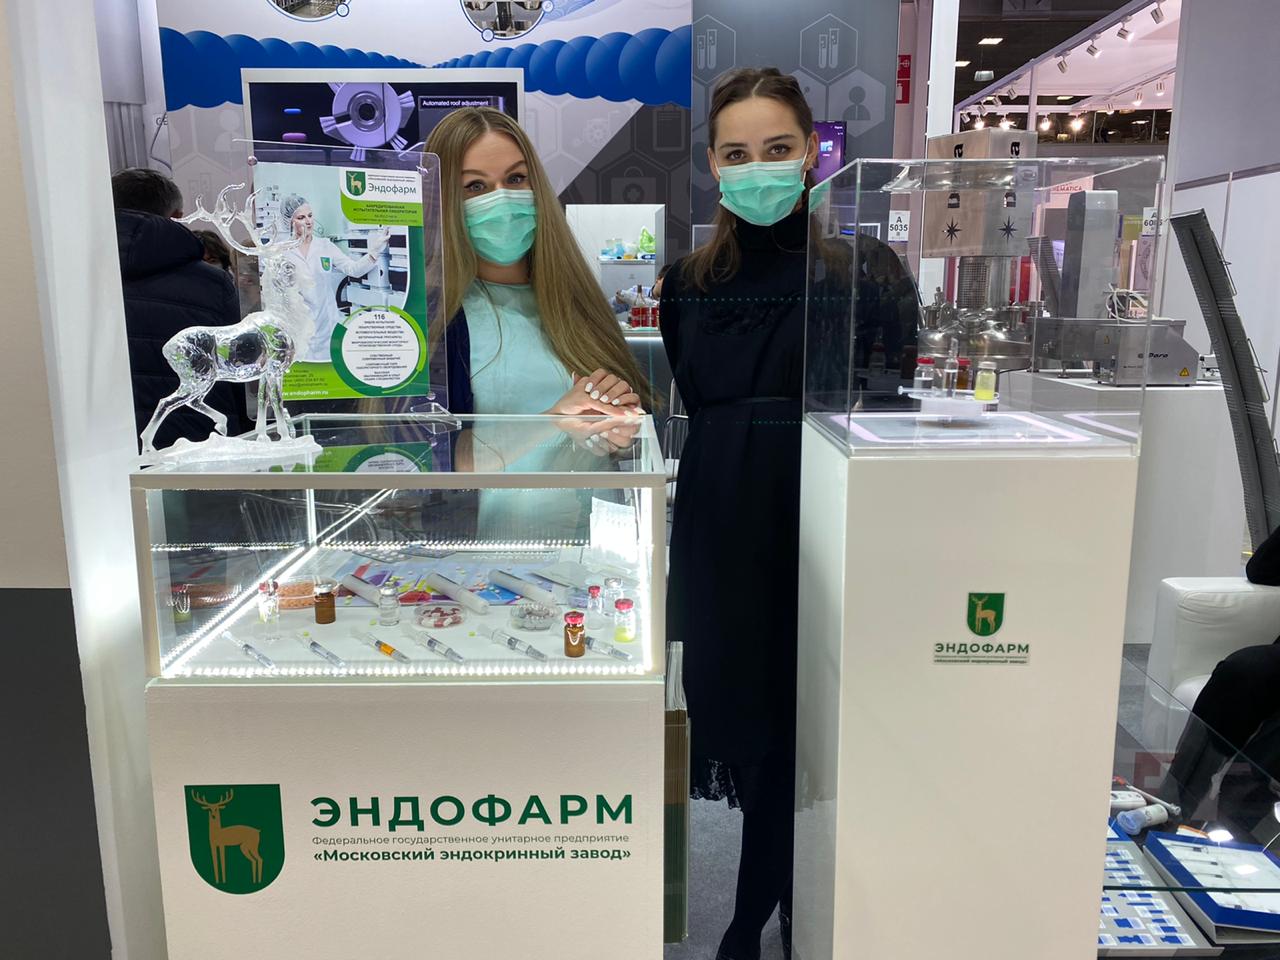 FSUE "Moscow Endocrine Plant" takes part in the 22nd International Exhibition of Equipment, Raw Materials and Technologies for Manufacturing Pharmaceutical Products "Pharmtech & Ingredients"